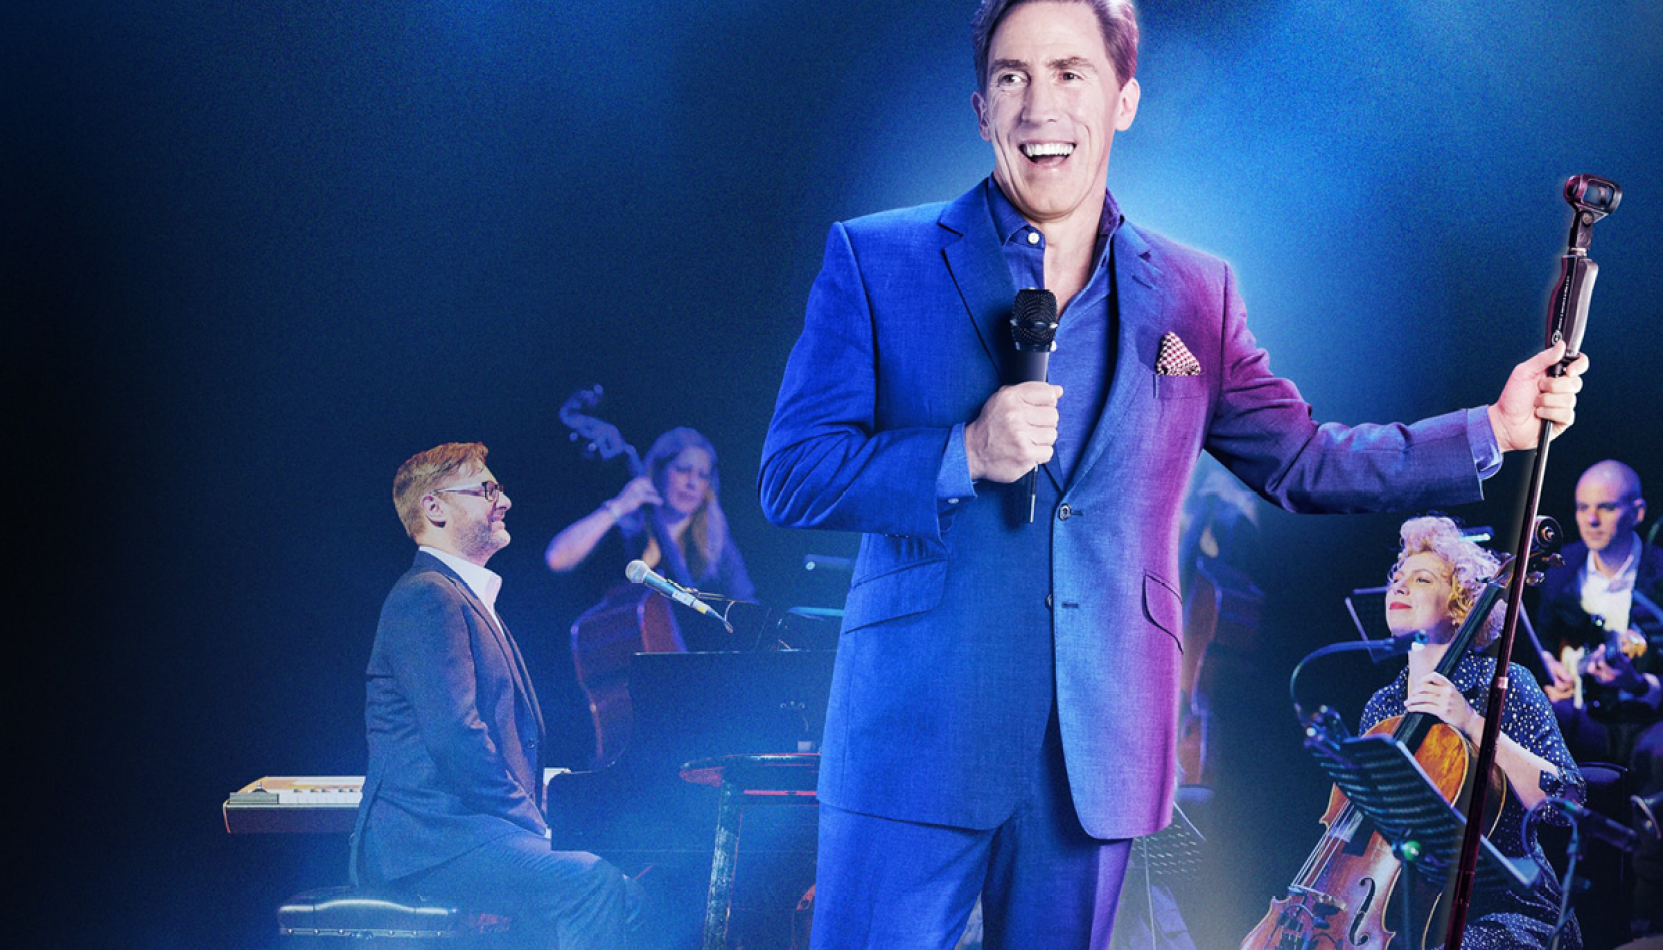 ROB BRYDON, WHATS ON THIS WEEK, whats on this week in surrey, guide to surrey, visit surrey, musical theatre, live music, comedy, theatre, rose theatre kingston, march 2024, february 2024, family, food and drink, entertainment, sports, wellbeing, eco-friendly events, gigs,